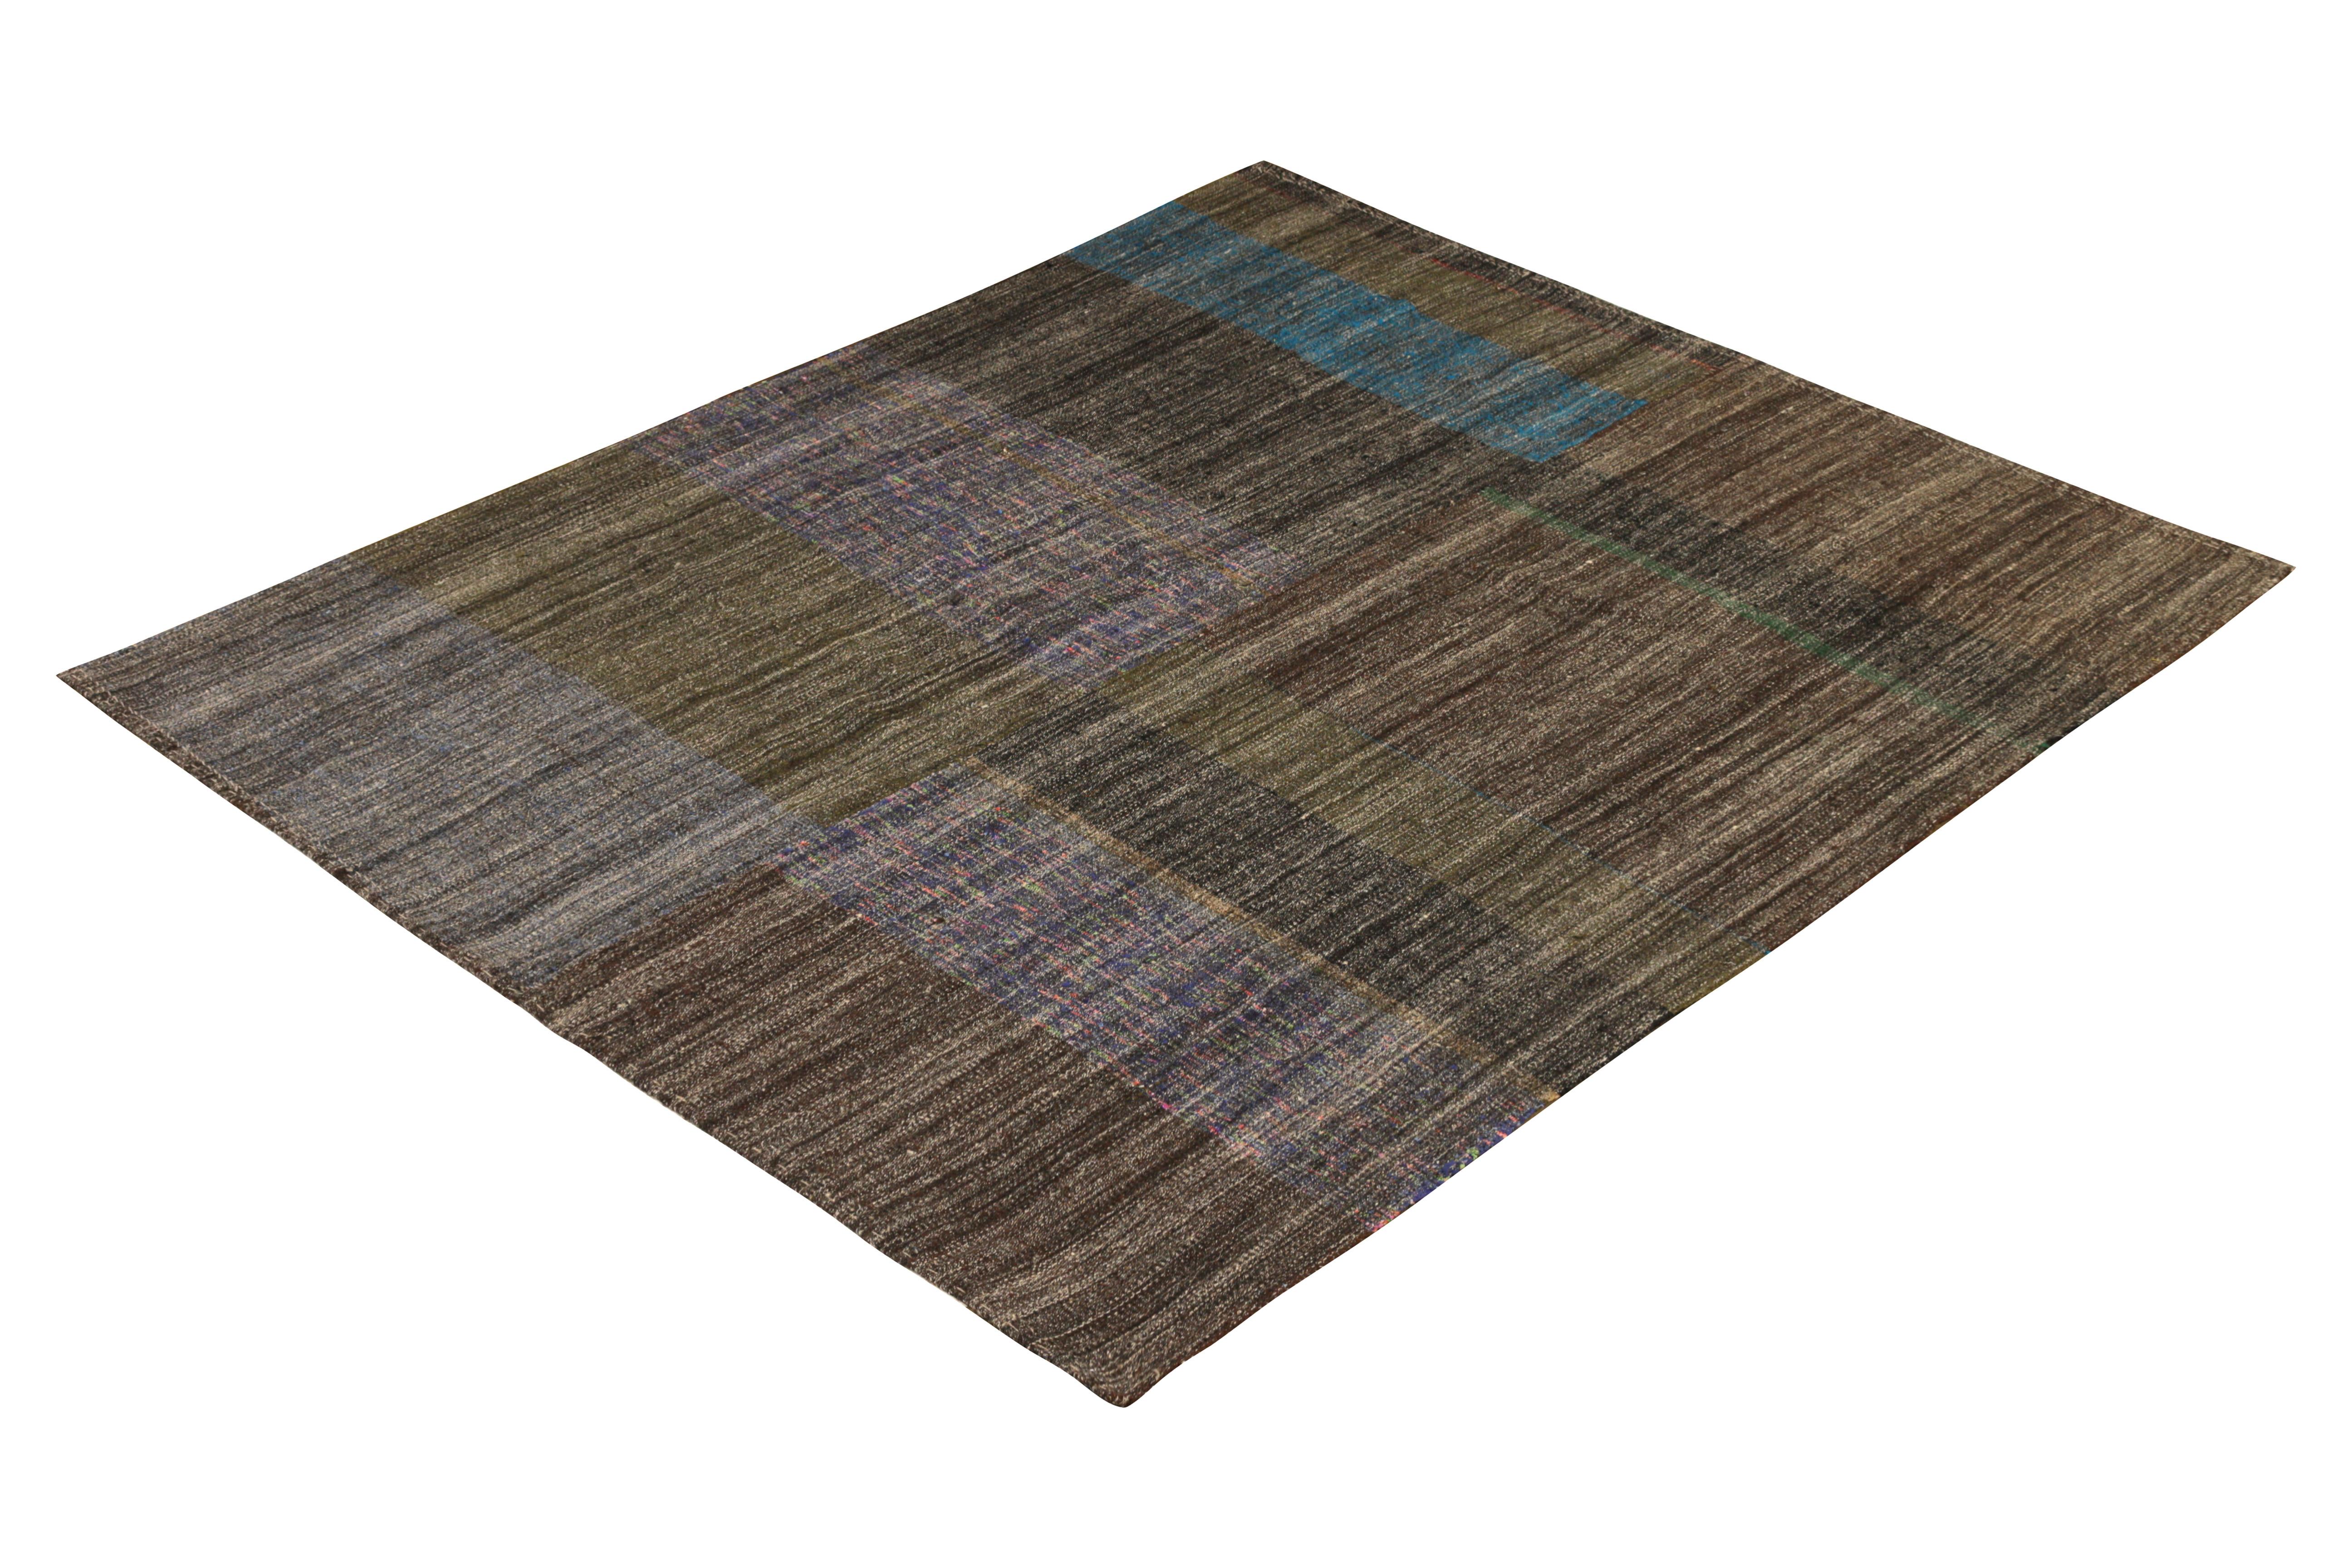 Handmade in a wool flat-weave originating from Turkey circa 1950-1960, this item is a midcentury vintage Kilim rug woven in a distinctive paneled style, remarking the bisection of pattern in the center and the intriguing colorway variations it